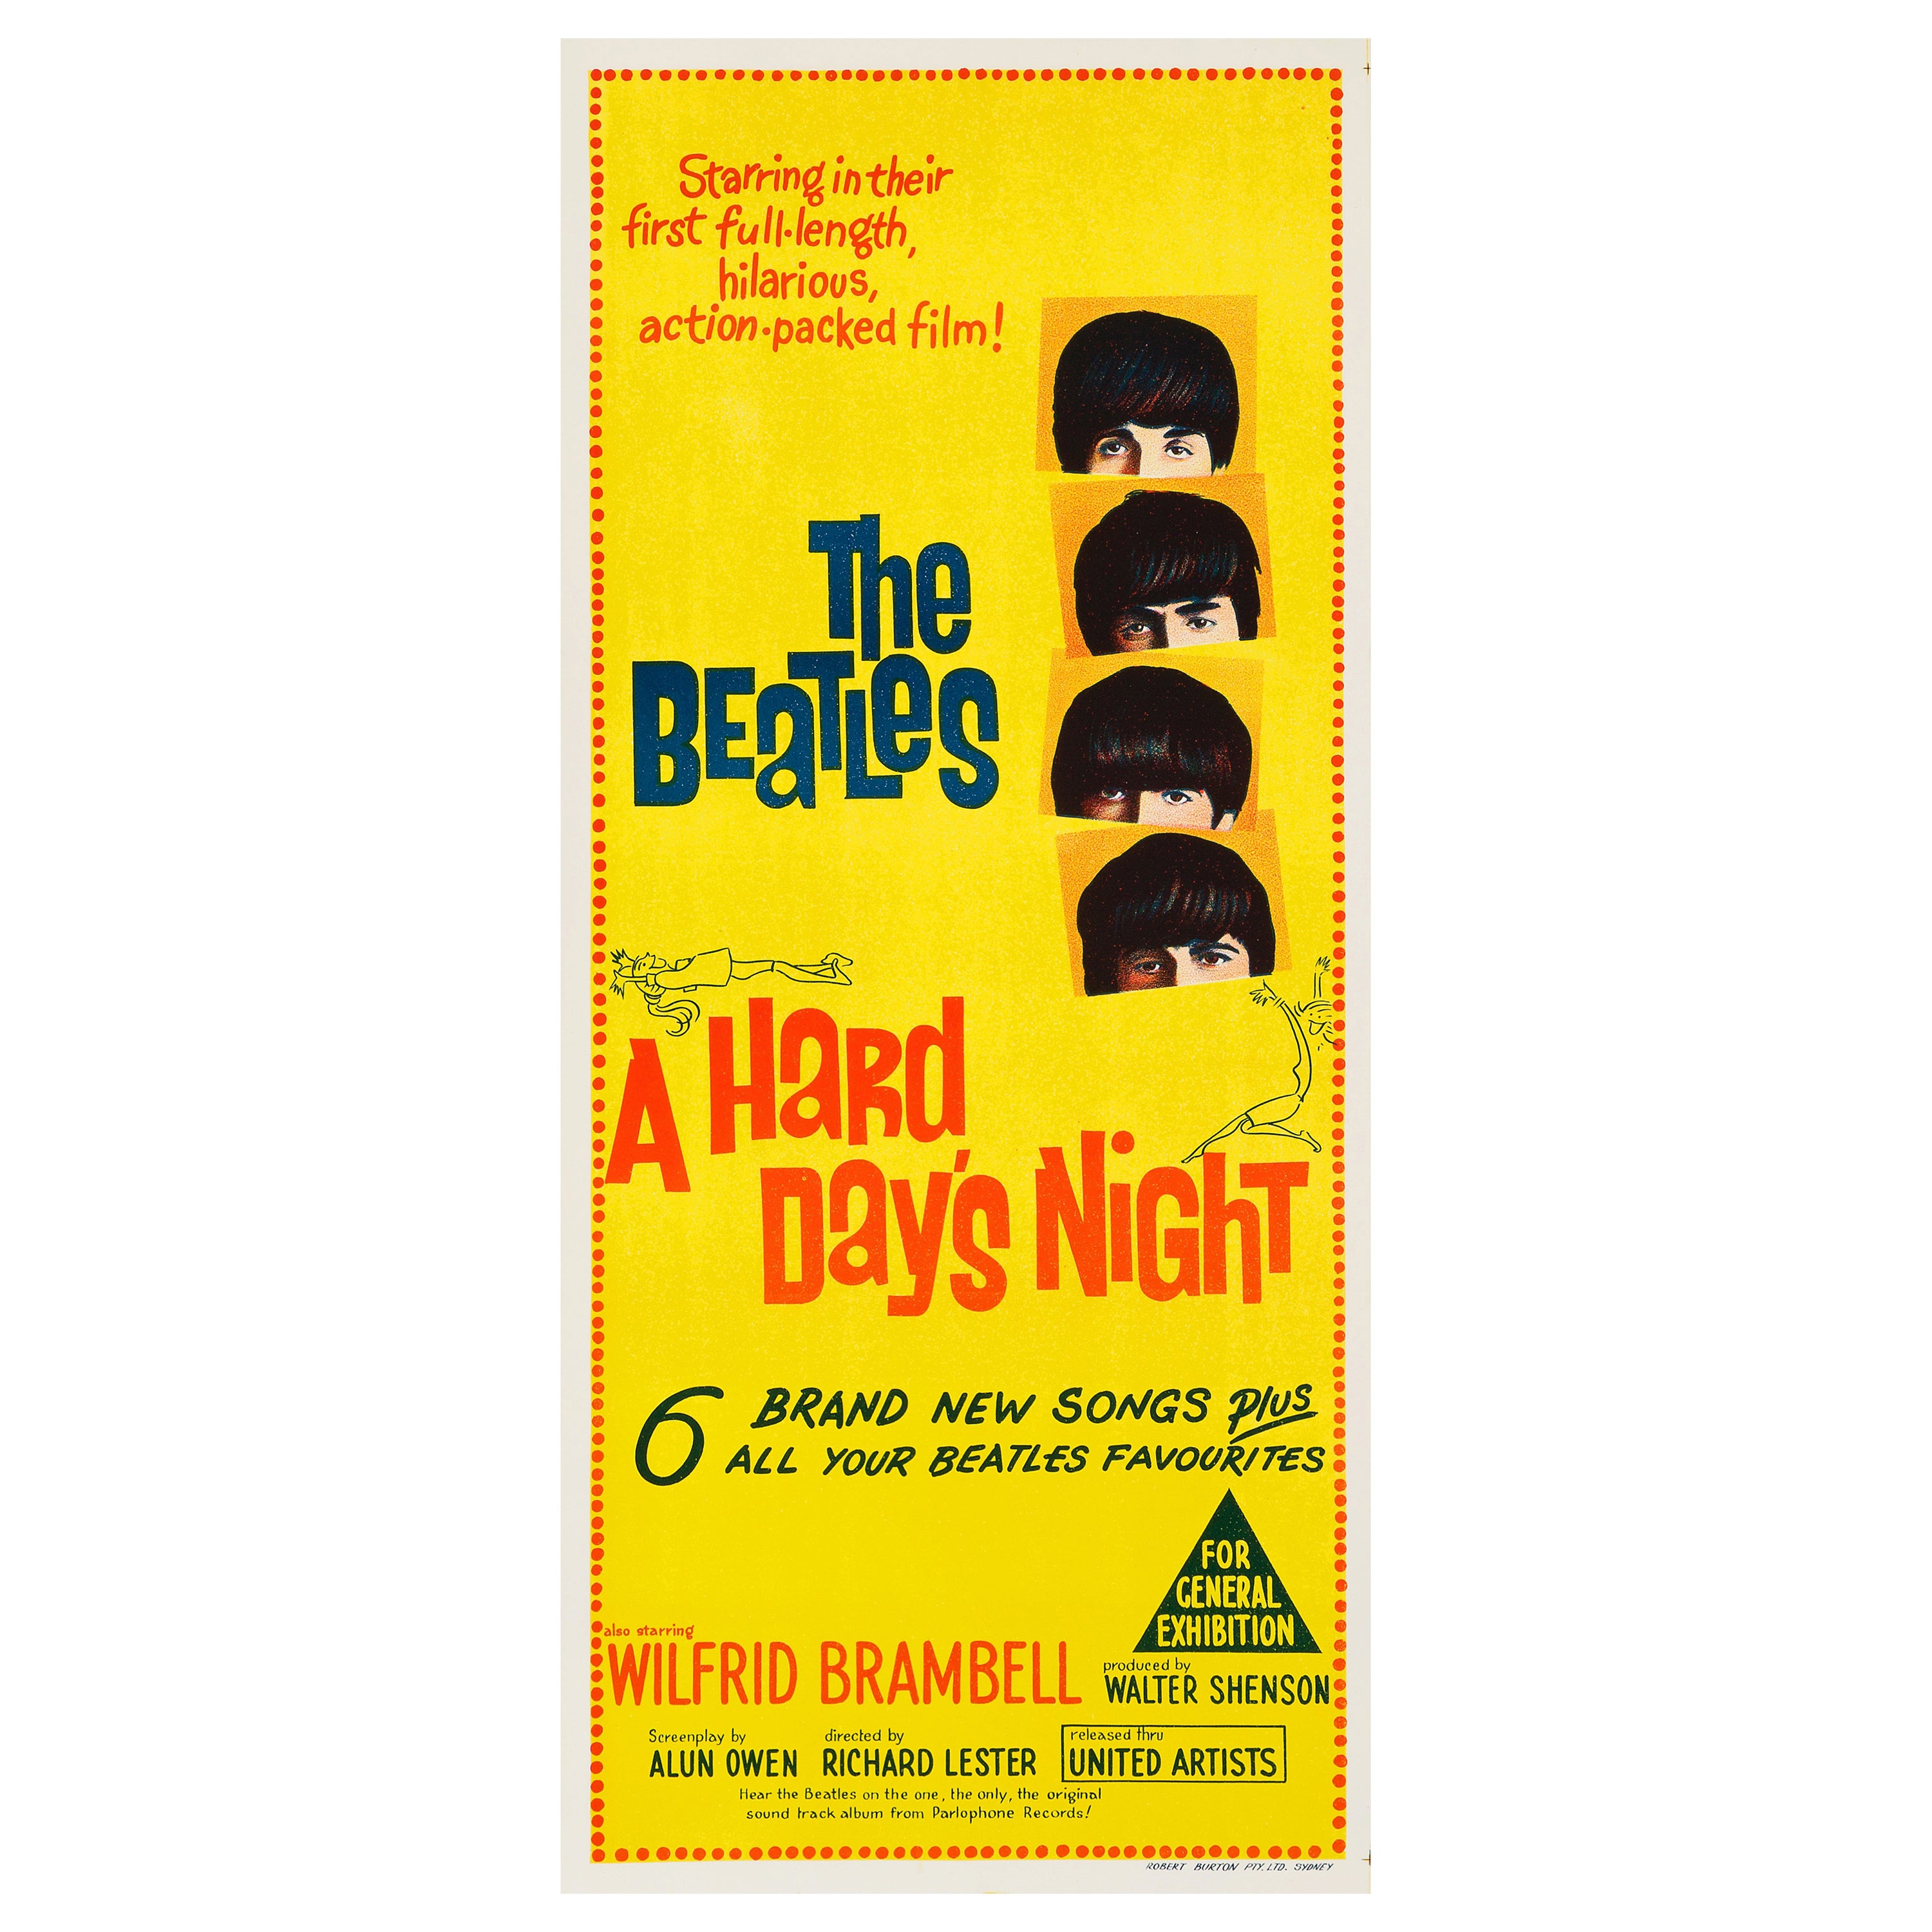 The Beatles 'A Hard Day's Night' Original Vintage Movie Poster, Australian, 1964 For Sale